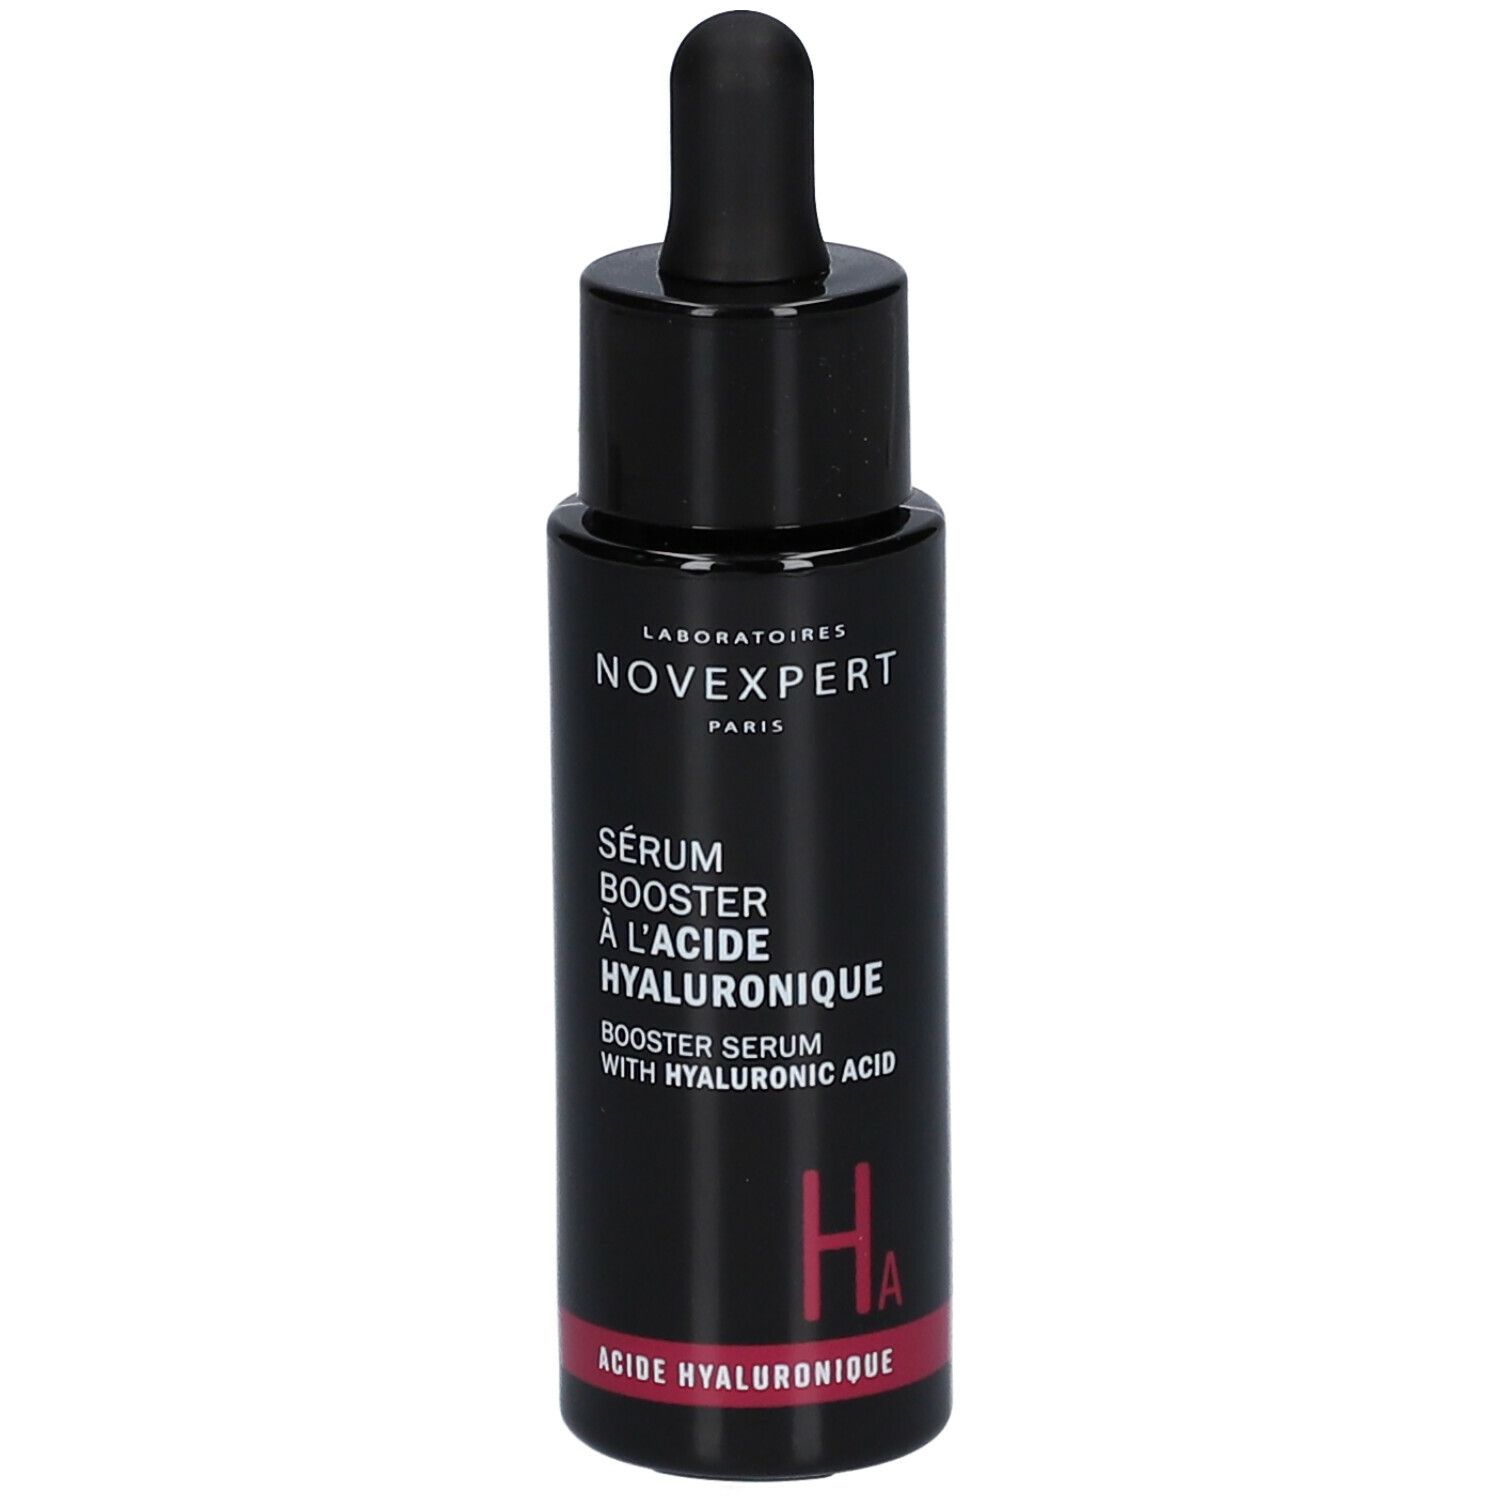 Novexpert Booster Serum With Hyaluronic Acid 32  - Hyaluronic Acid Booster Serum With Hyaluronic Acid 3.2%